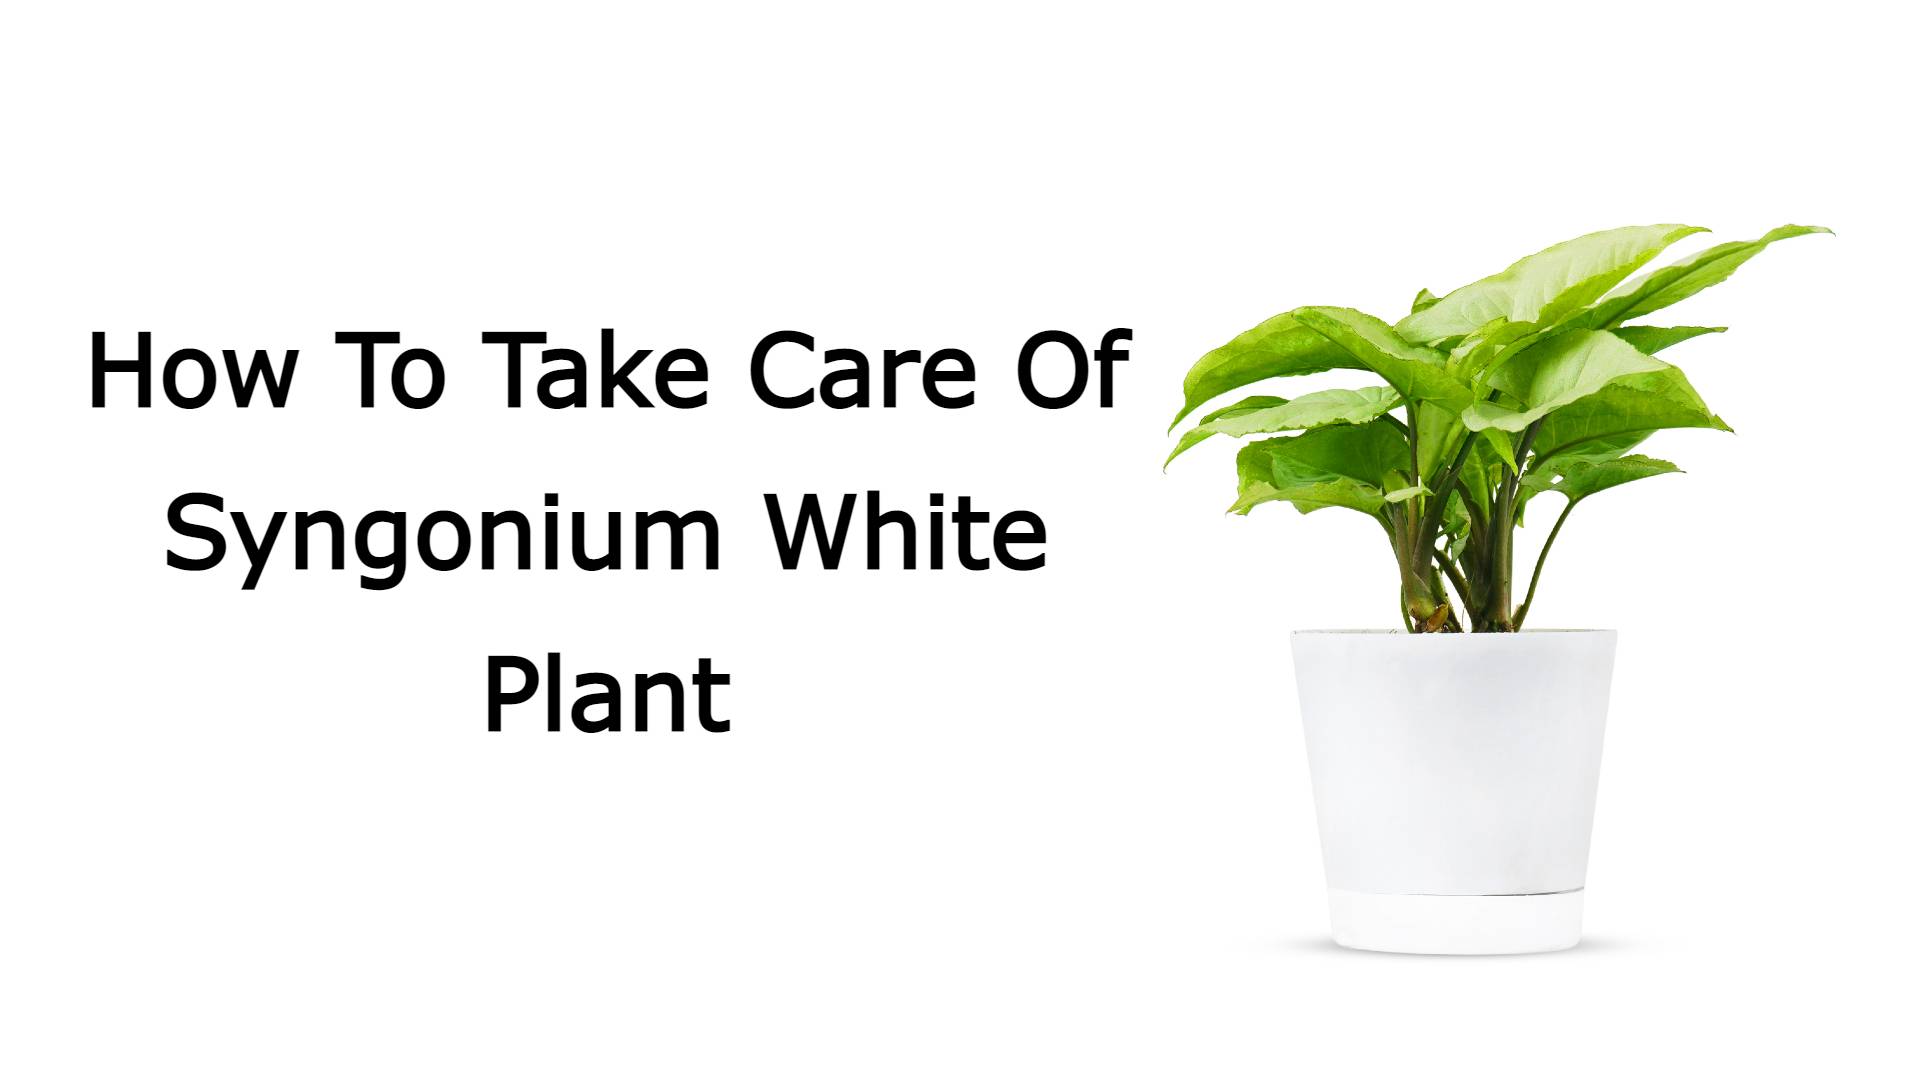 How To Take Care Of Syngonium White Plant